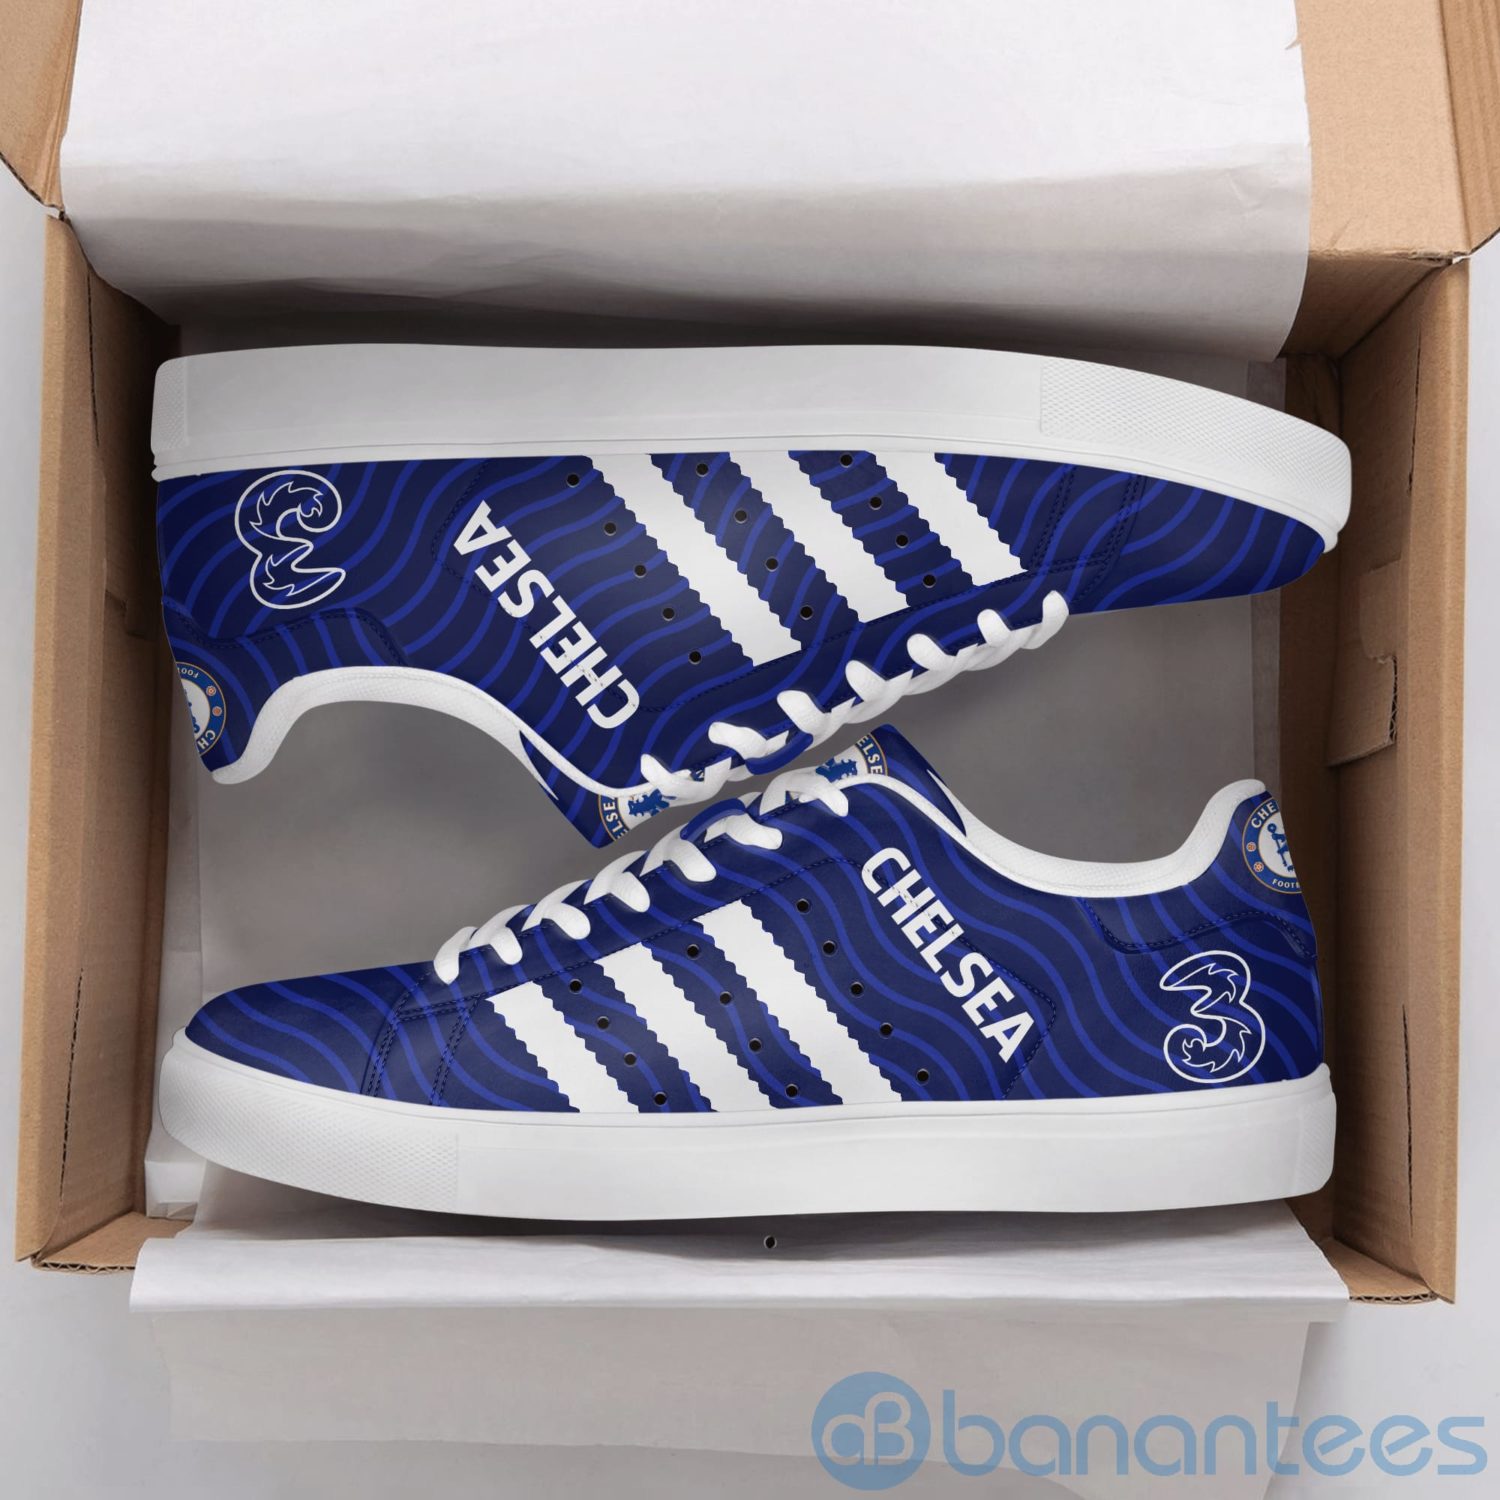 Chelsea Fc White Striped Low Top Skate Shoes